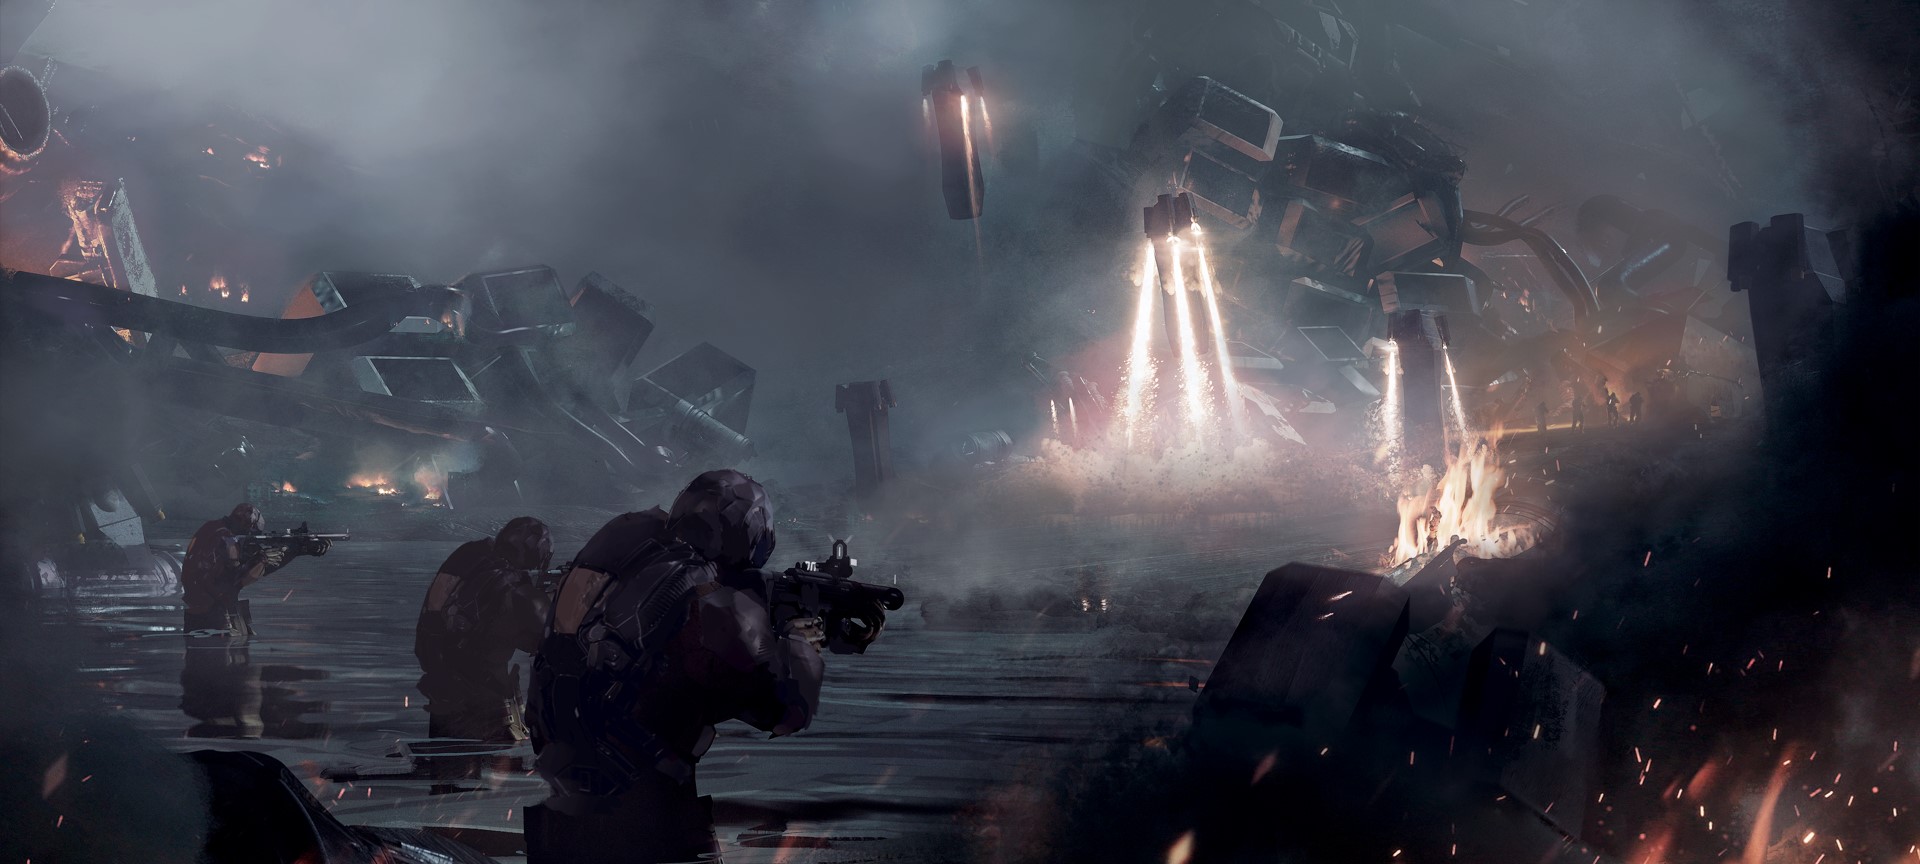 EVE Online is getting a multiplayer shooter spinoff Digital Trends